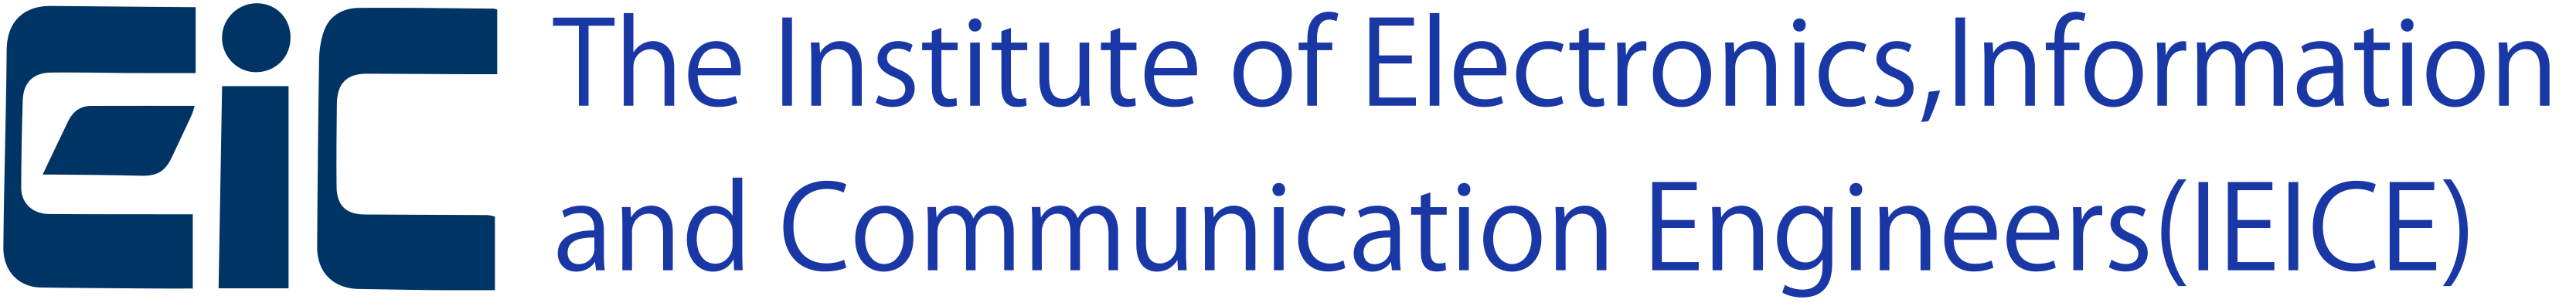 The Institute of Electronics, Information and Communication Engineers